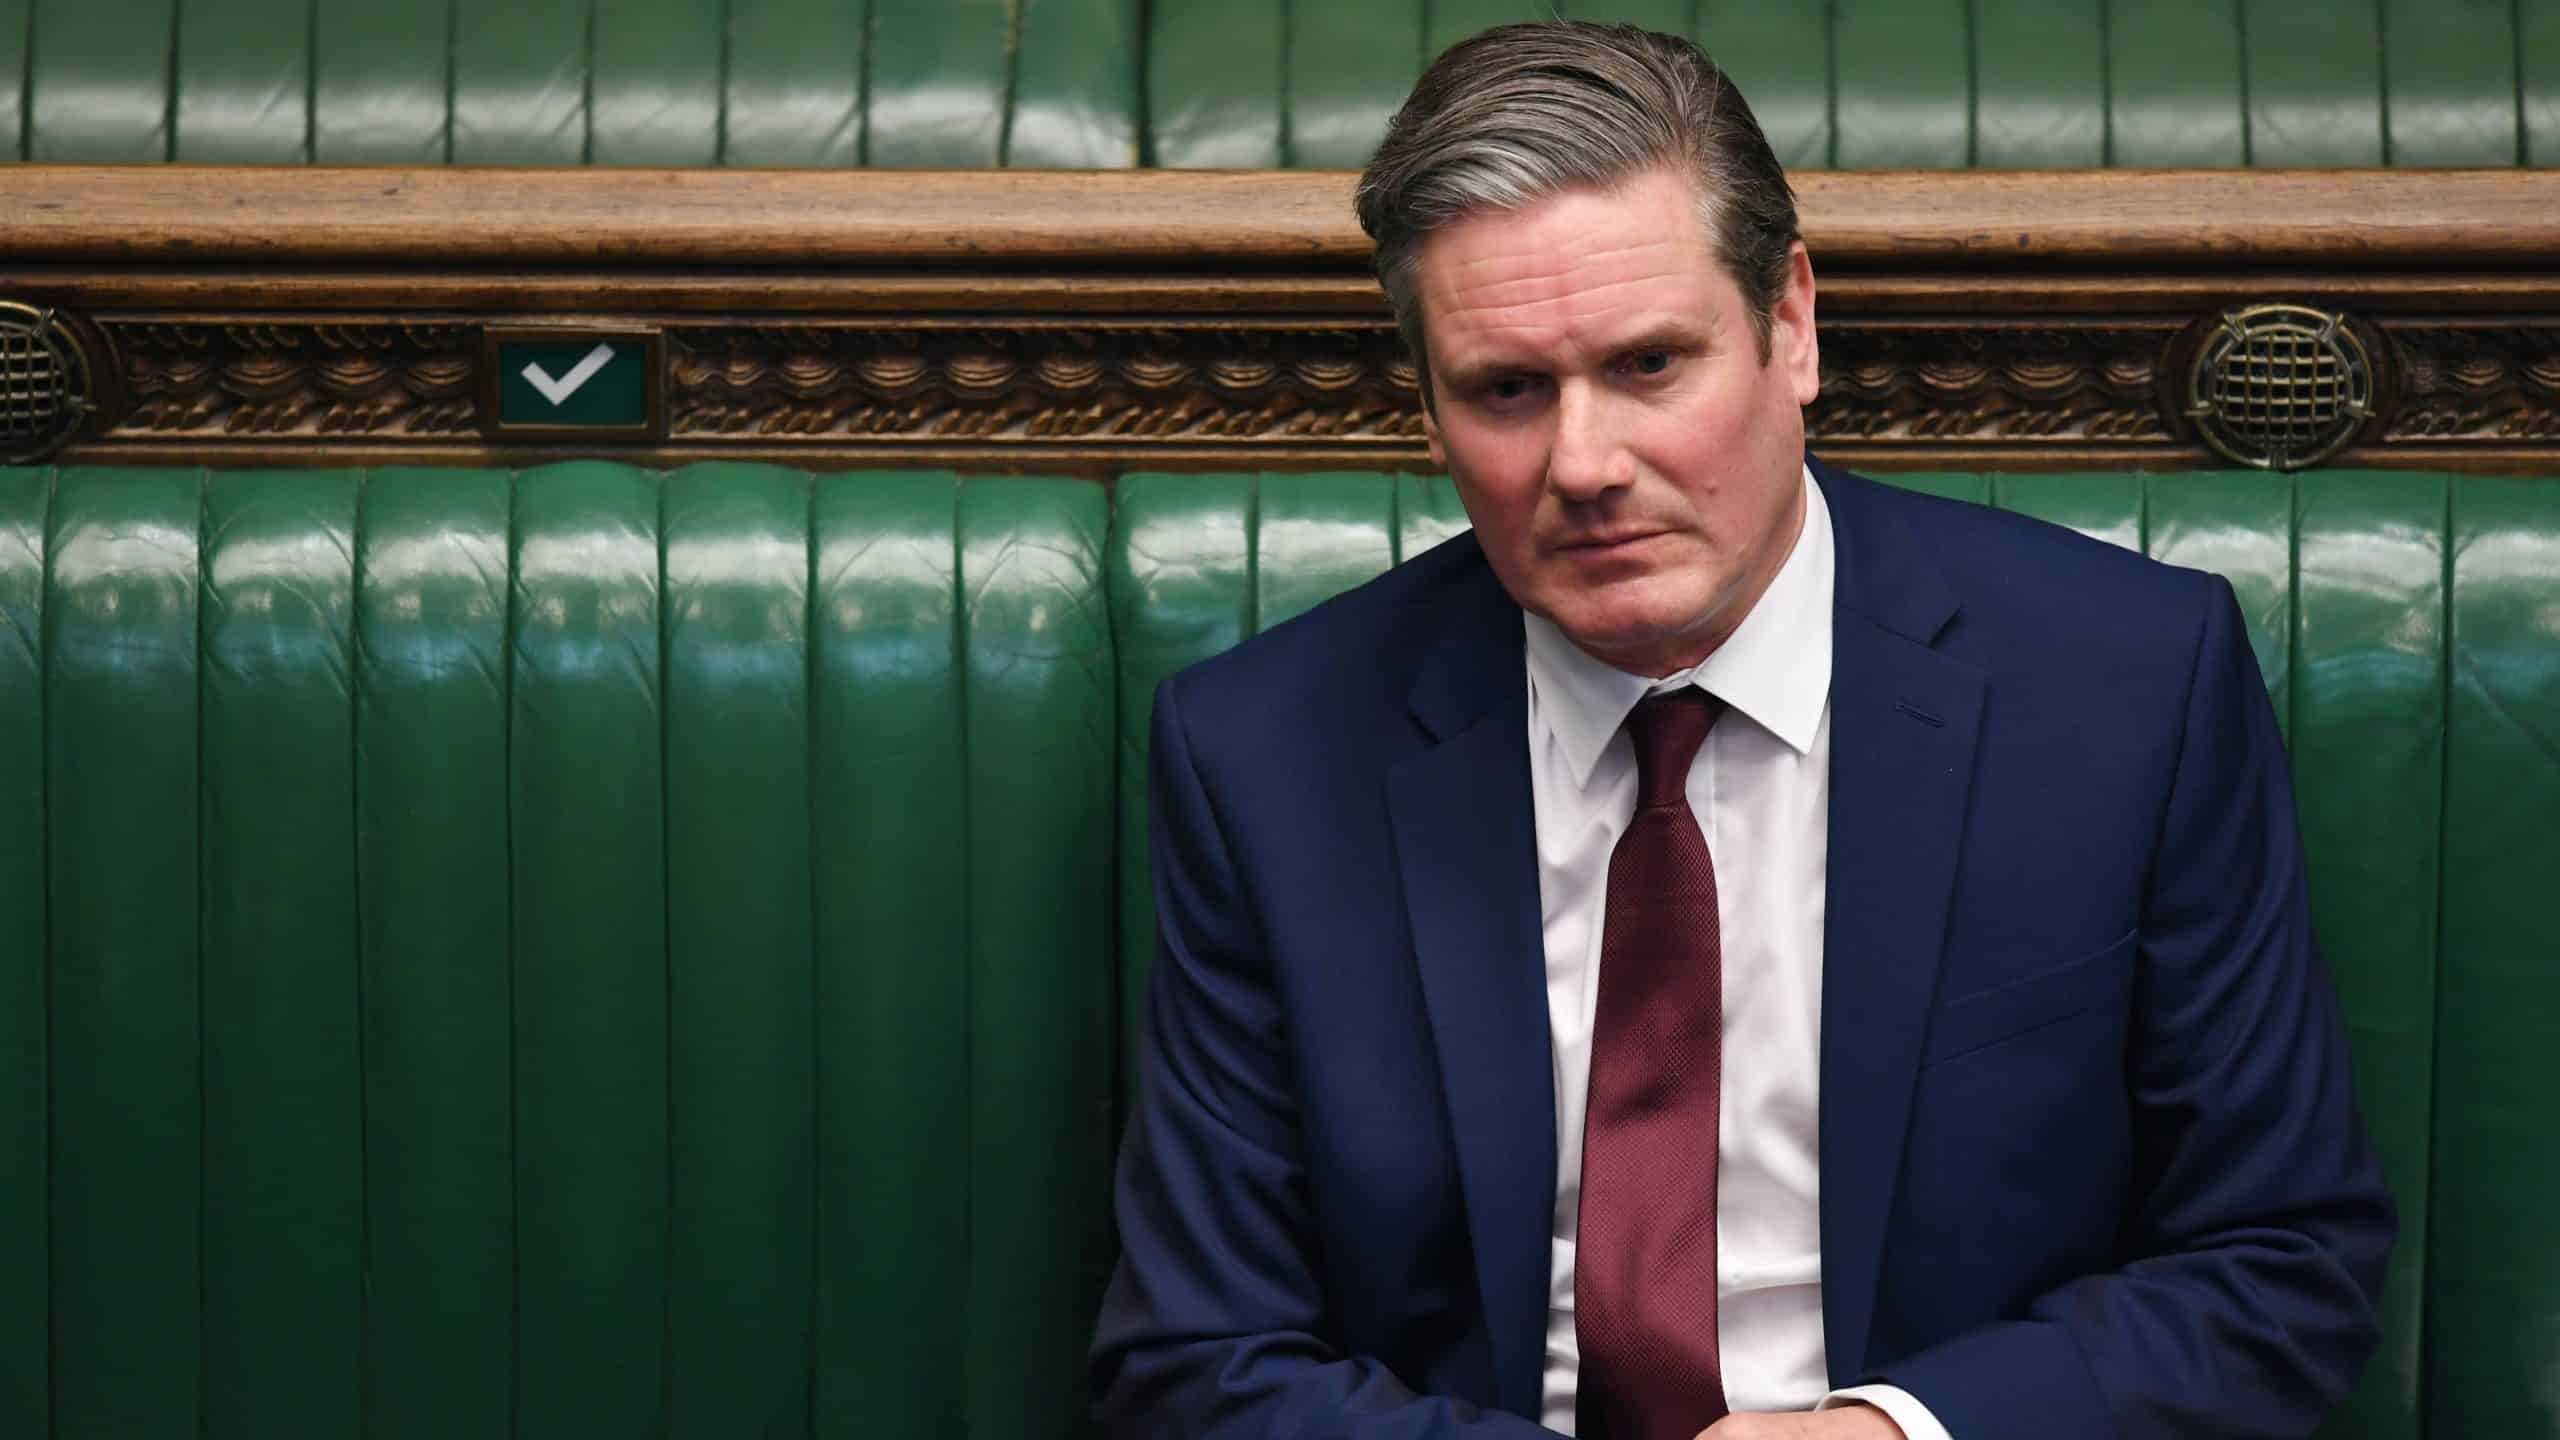 Starmer approval rating jumps 34 points ahead of Johnson